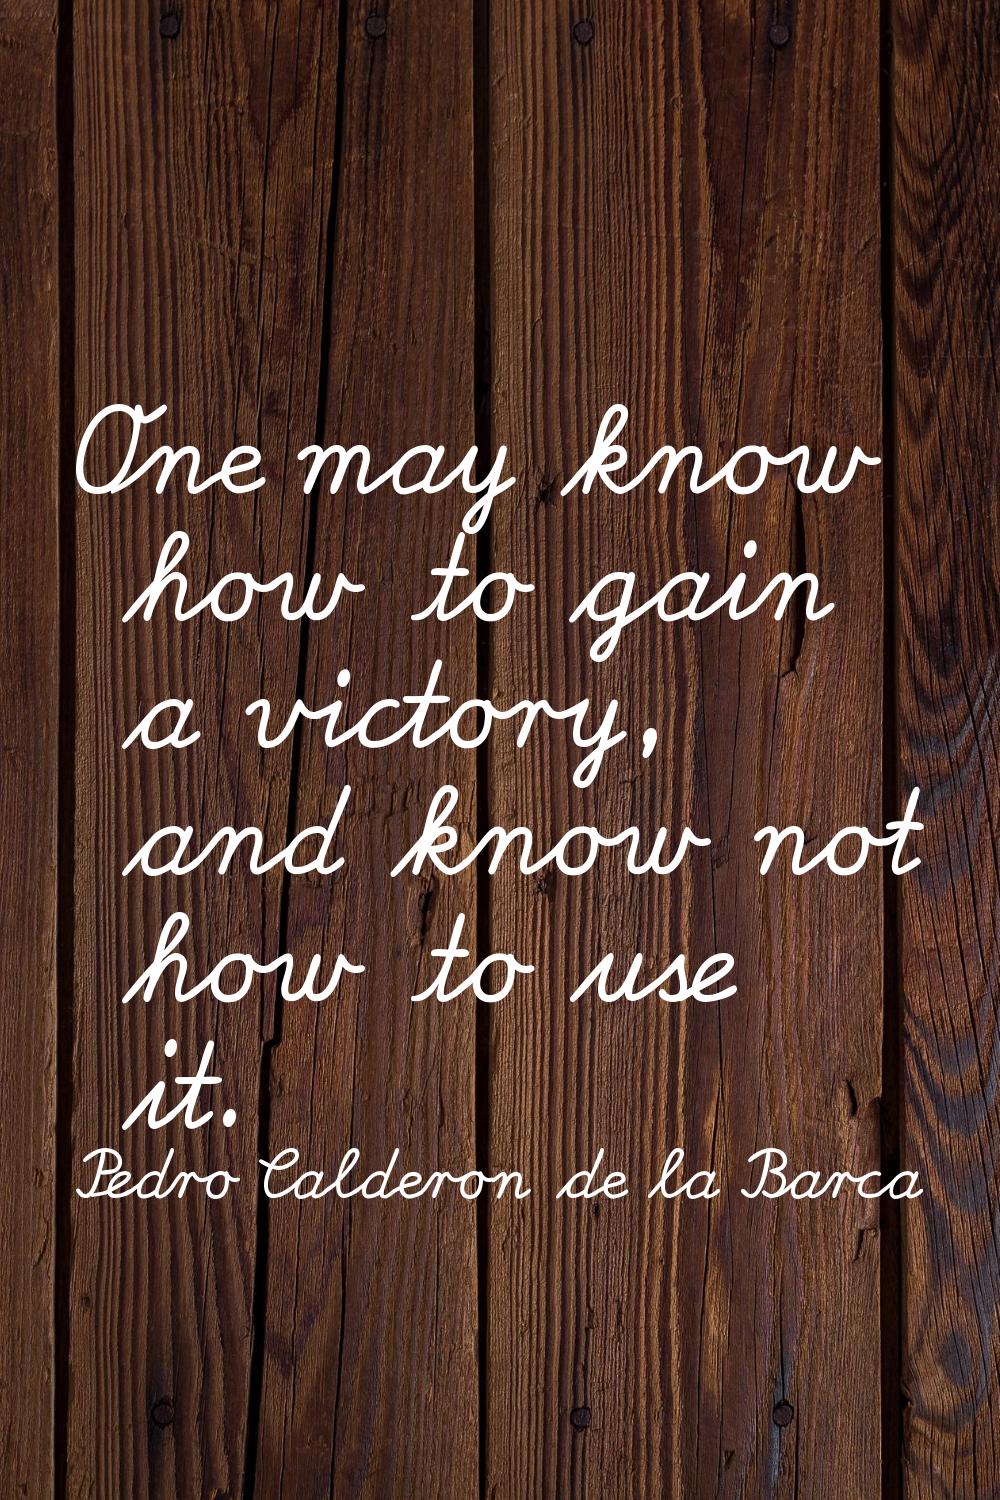 One may know how to gain a victory, and know not how to use it.